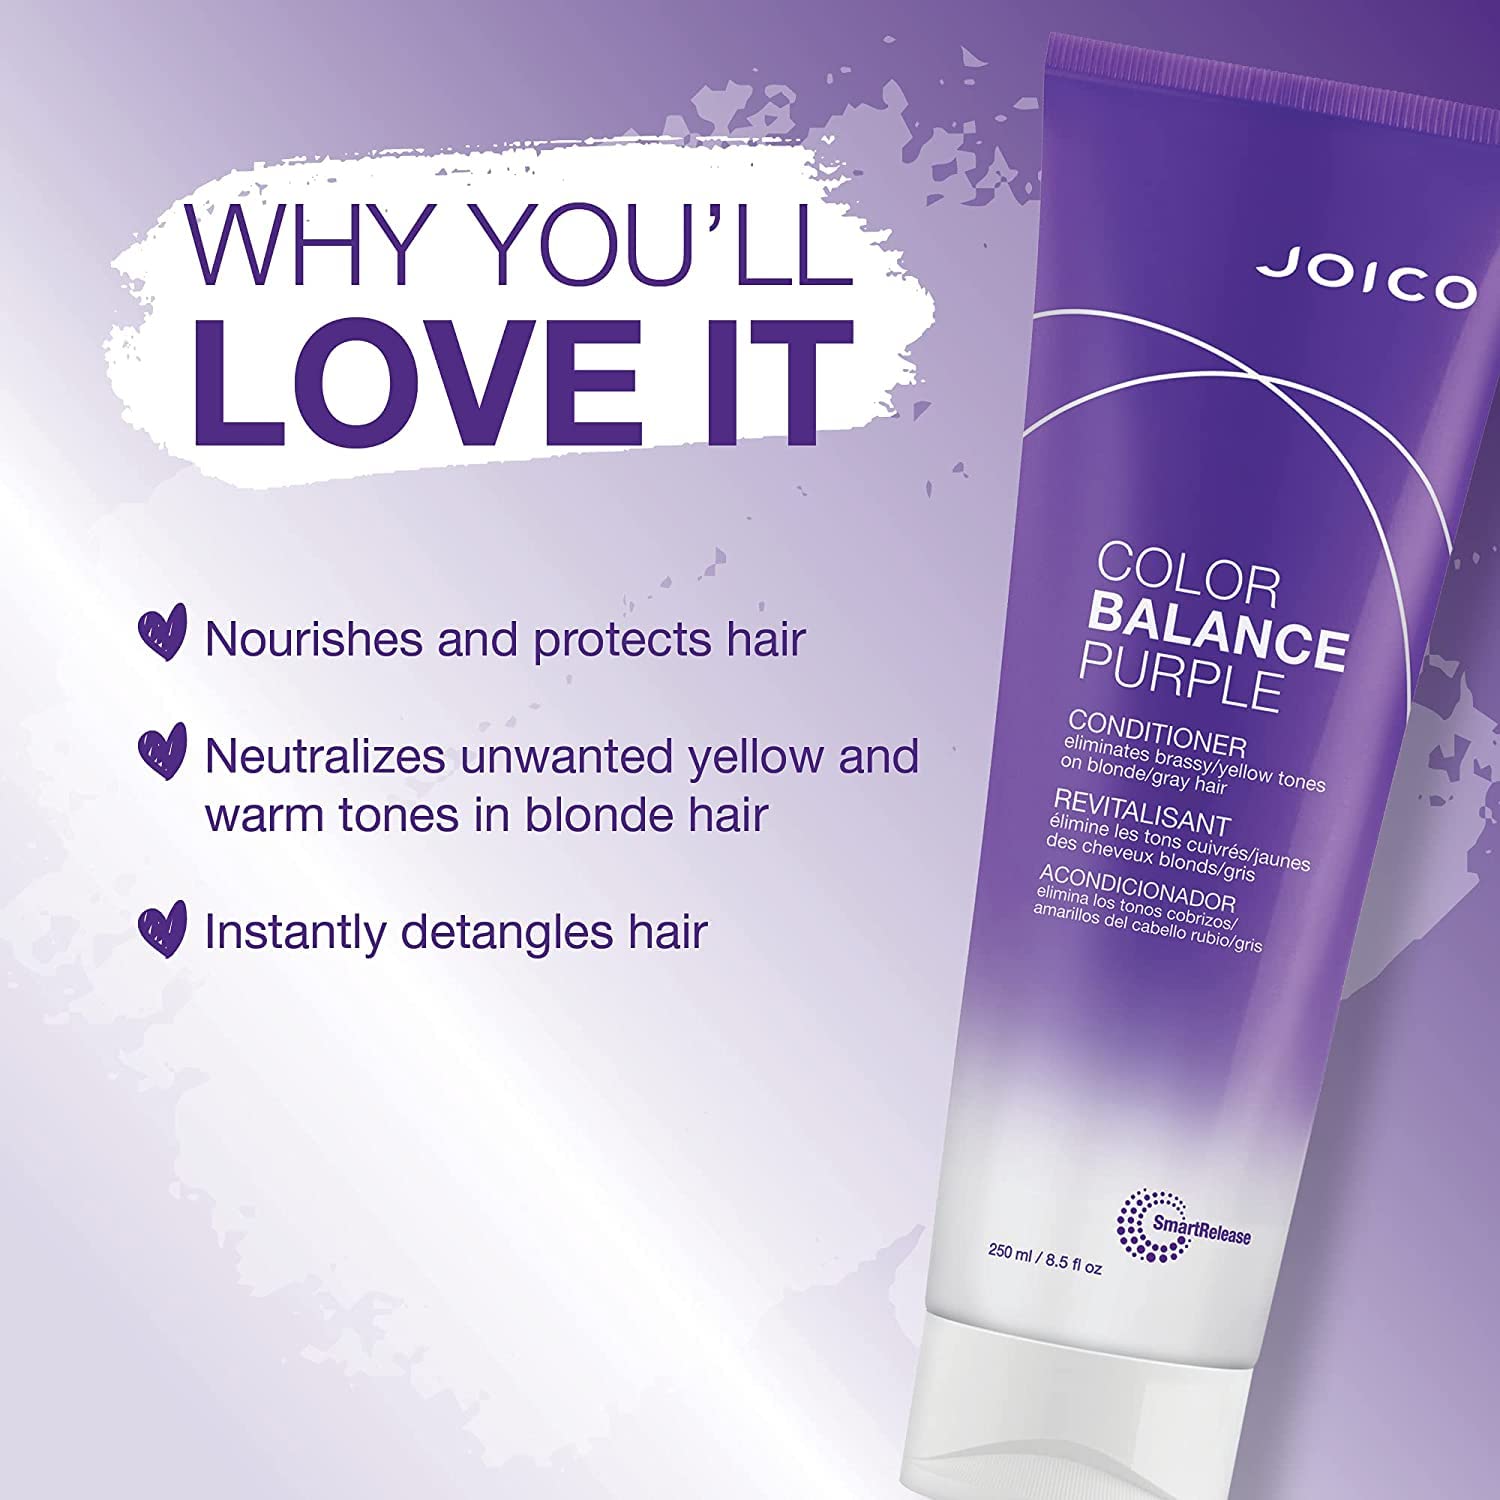 Joico Color Balance Purple Shampoo & Conditioner Set, Eliminate Brassy and Yellow tones, for Cool Blonde or Gray Hair